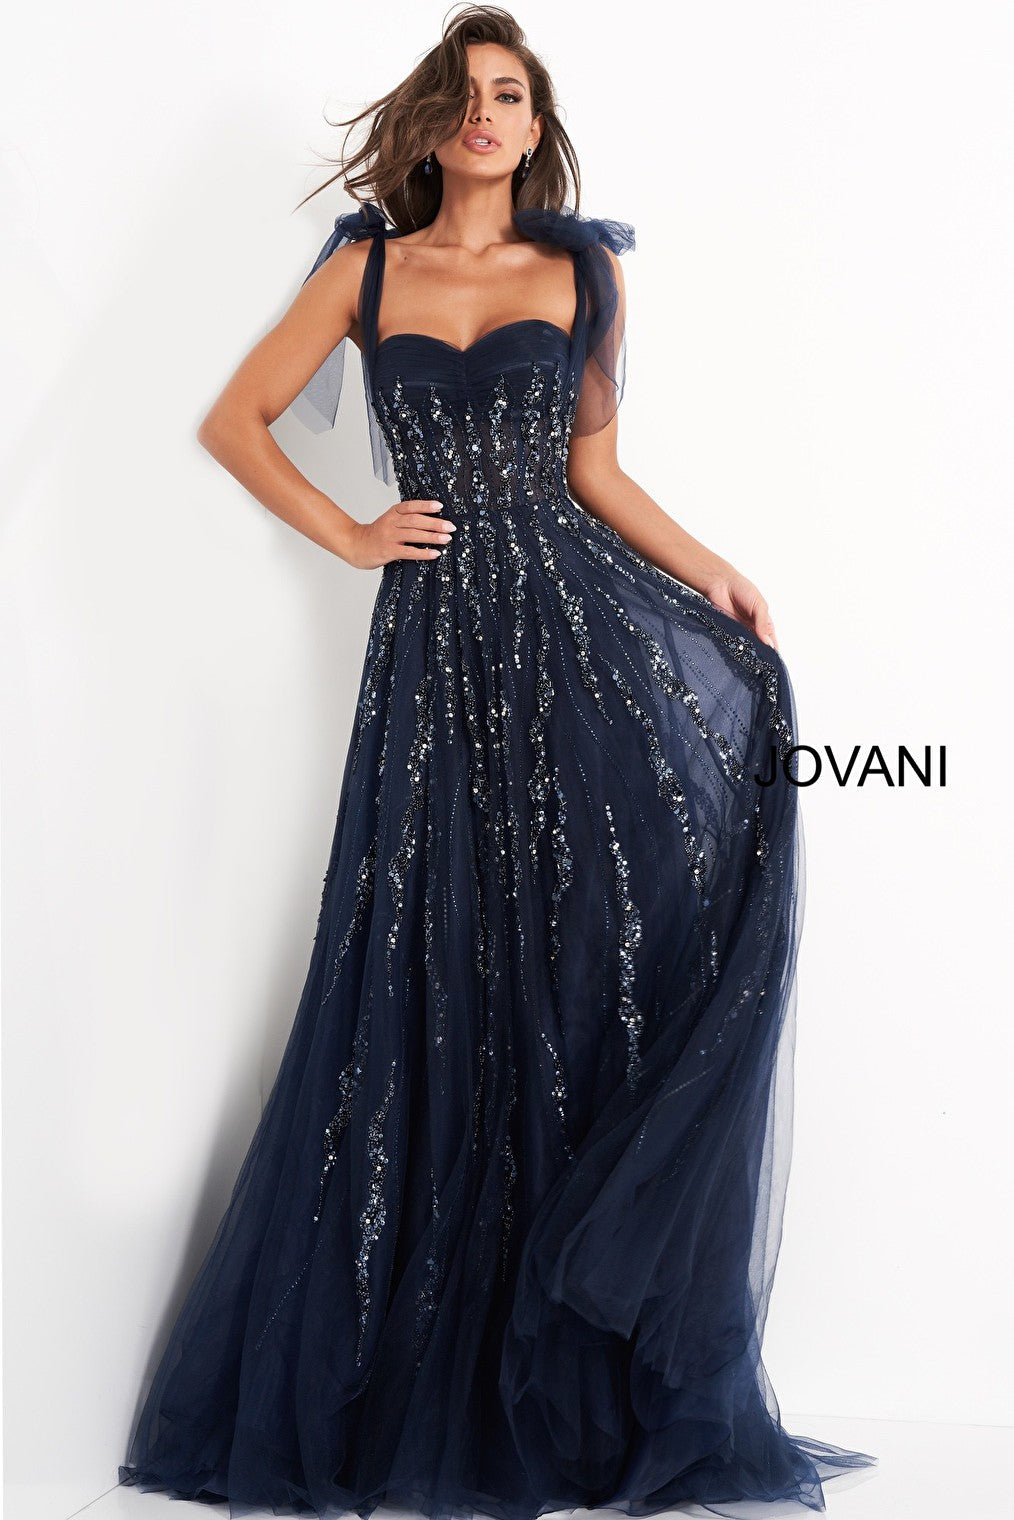 Navy ebaded Jovani evening gown 04634